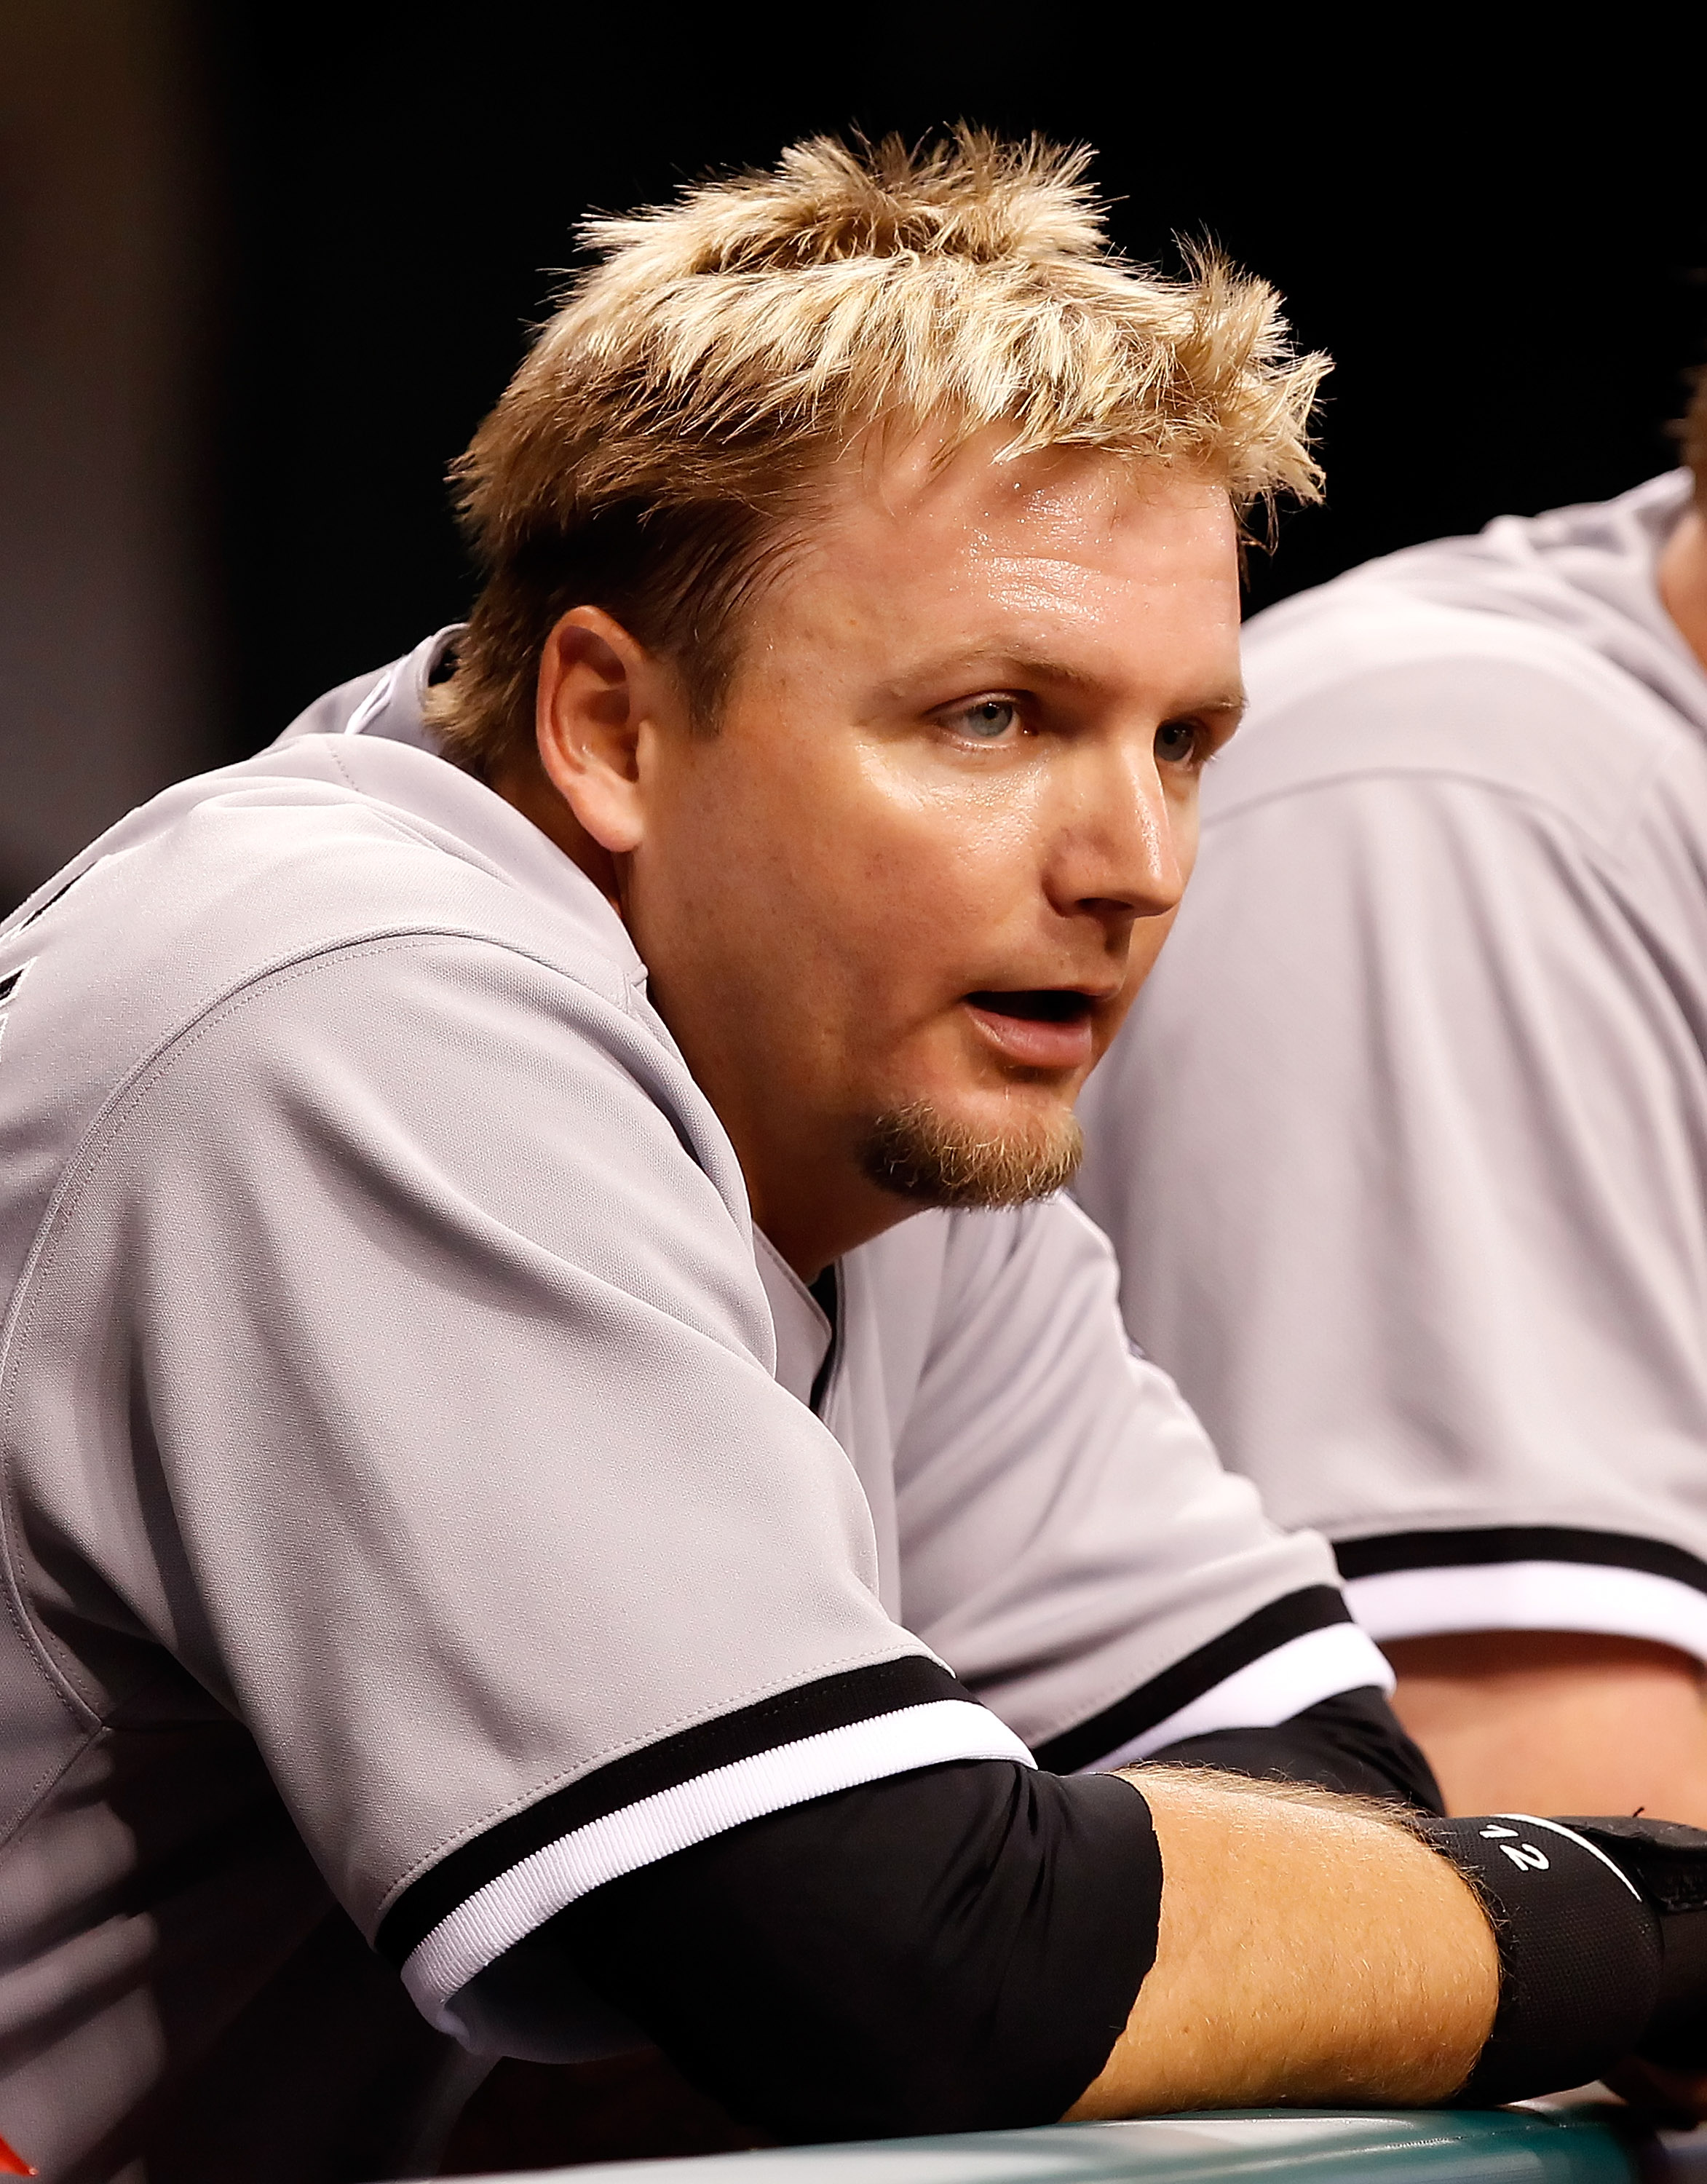 ST PETERSBURG, FL - APRIL 21:  Catcher A.J. Pierzynski #12 of the Chicago White Sox watches from the dugout against the Tampa Bay Rays during the game at Tropicana Field on April 21, 2011 in St. Petersburg, Florida.  (Photo by J. Meric/Getty Images)